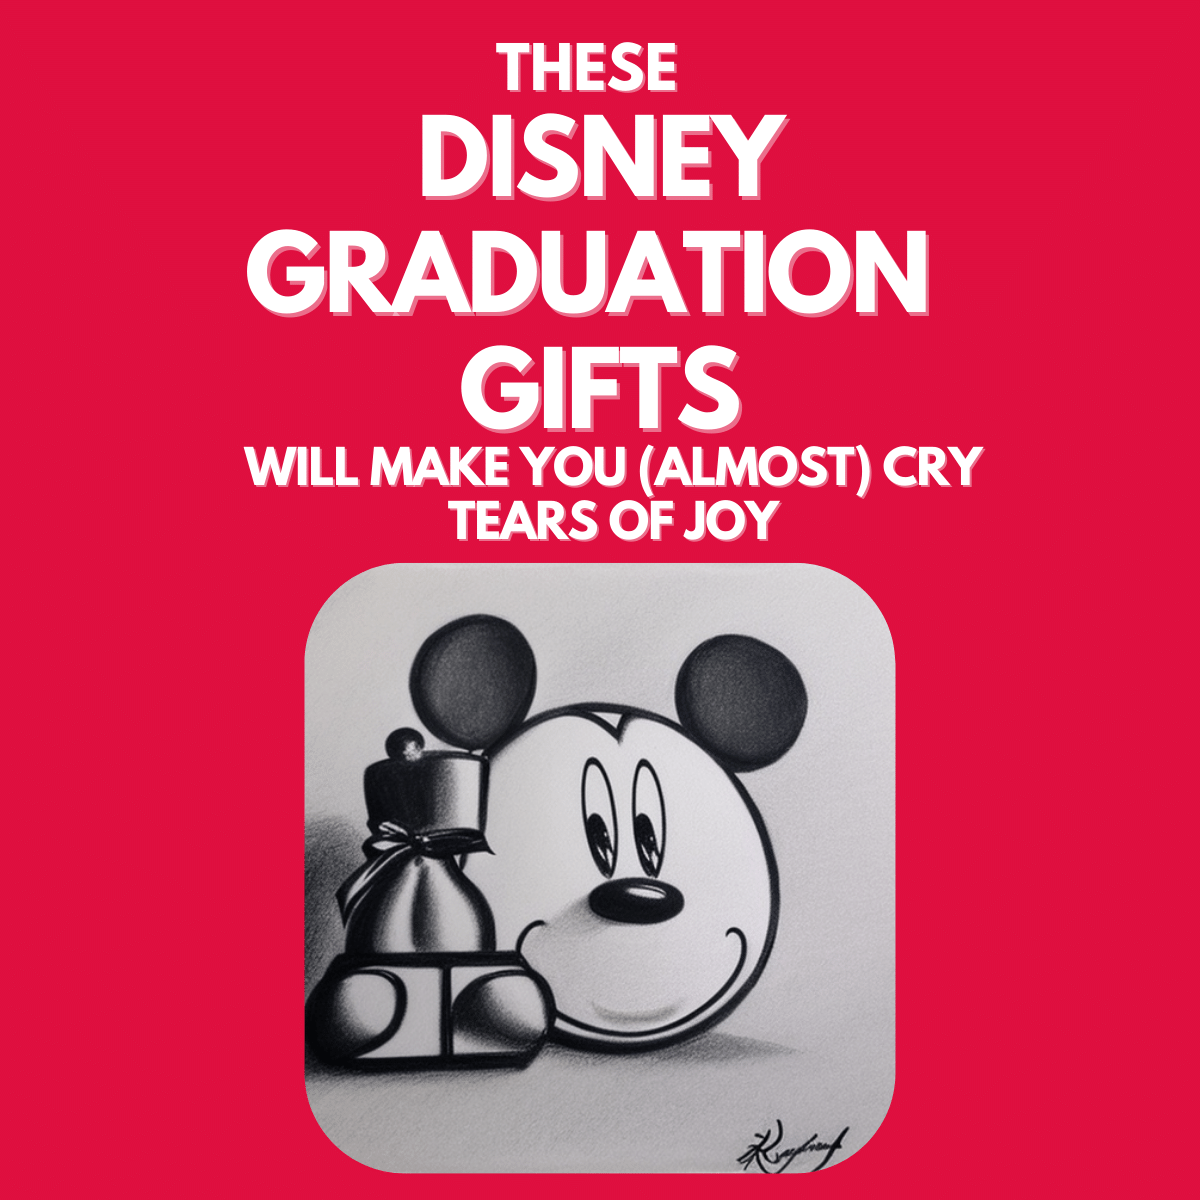 These Disney Graduation Gifts Will Make You (Almost) Cry tears of Joy